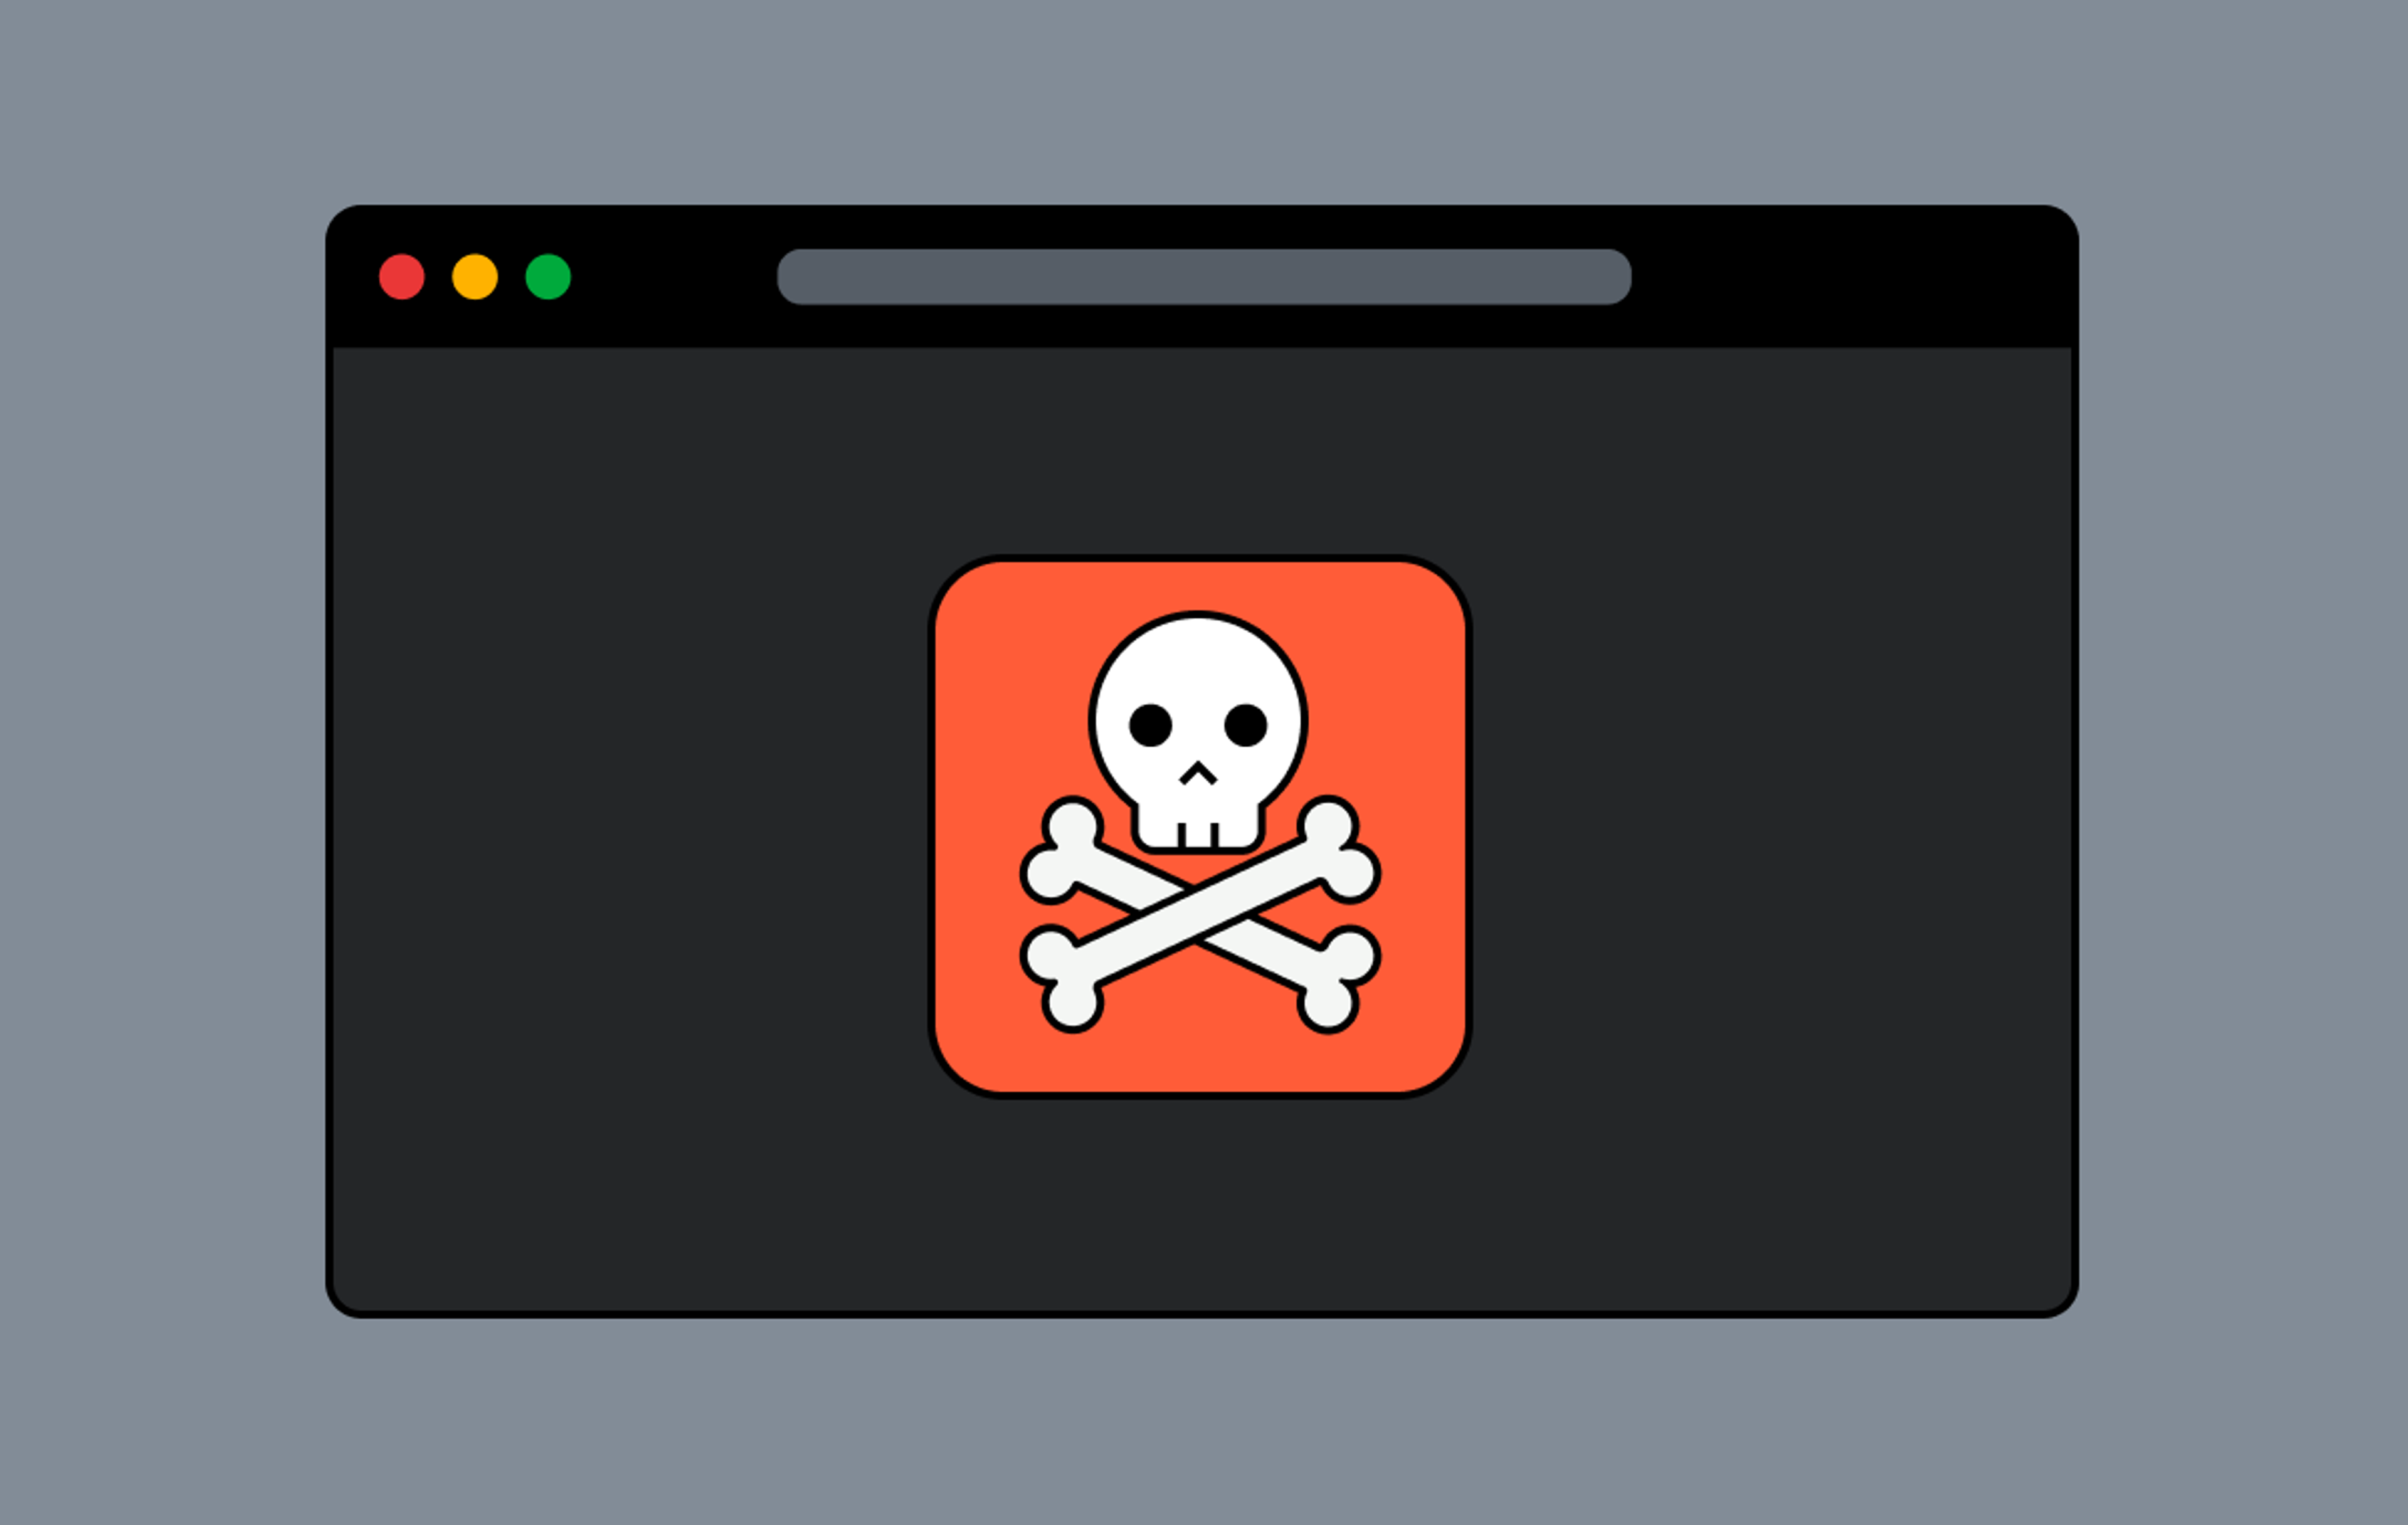 Skull and crossbones on an image of a browser screen